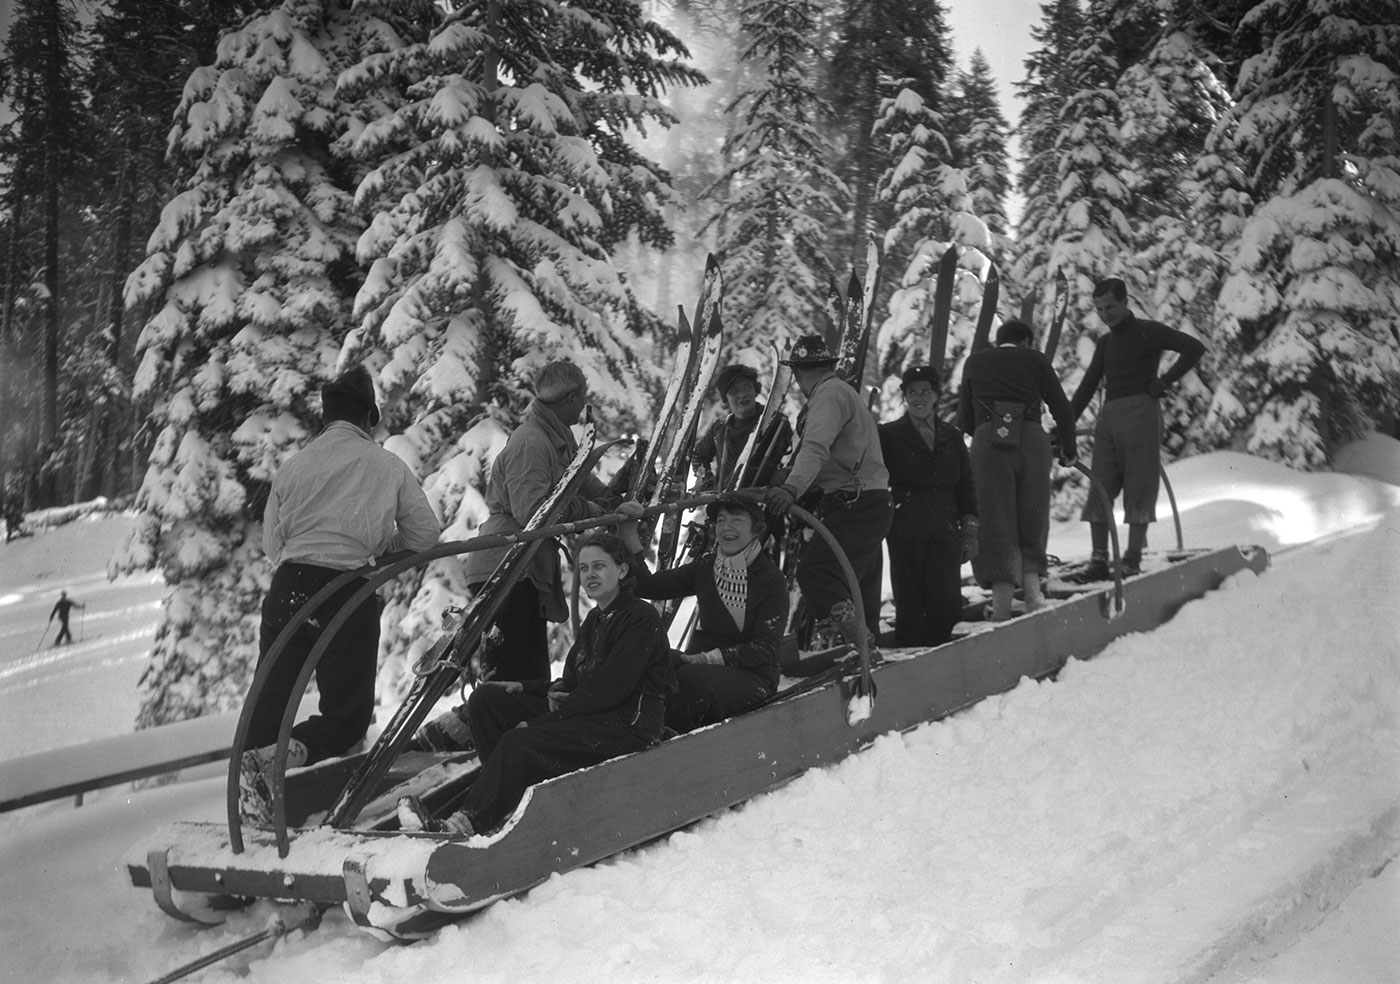 Historic image of the Upski at Badger Pass, twin sleds pulled by a cable. 